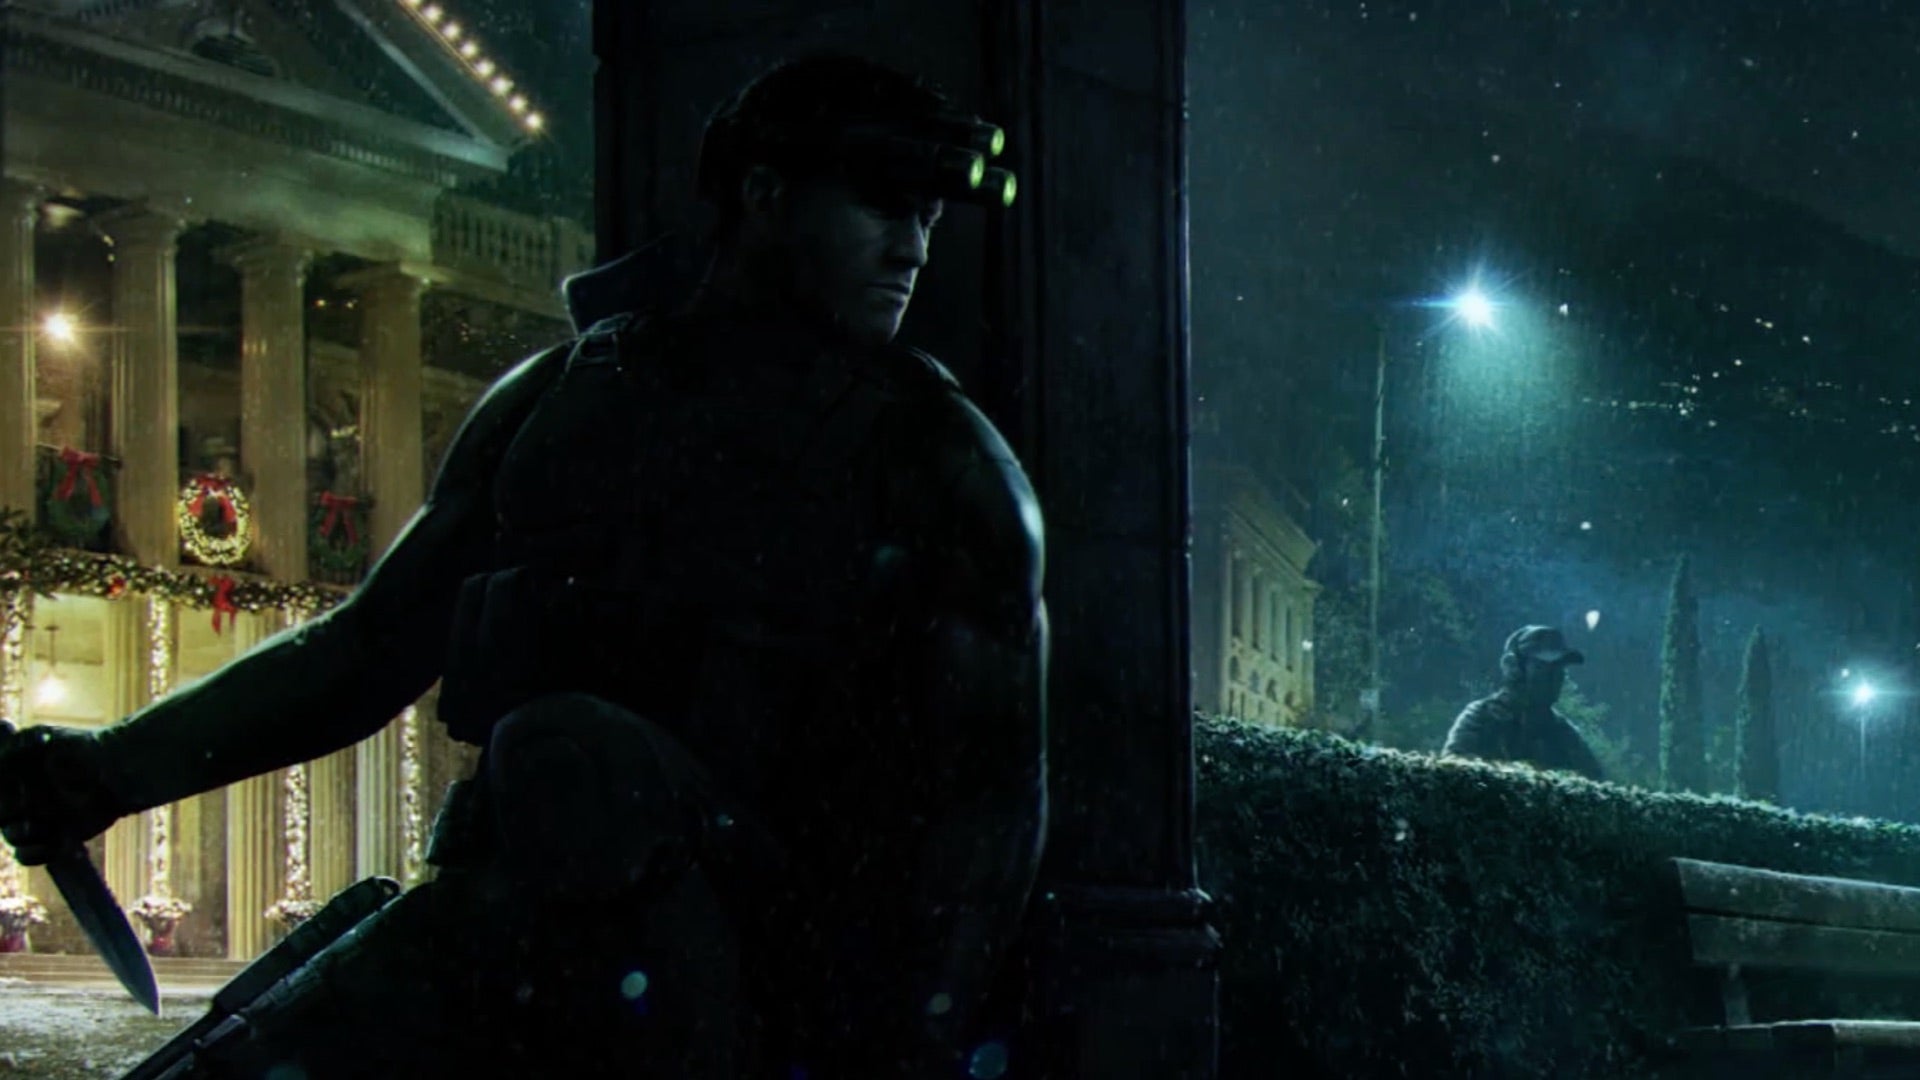 Image for Splinter Cell remake shares concept art but still "very early" in development